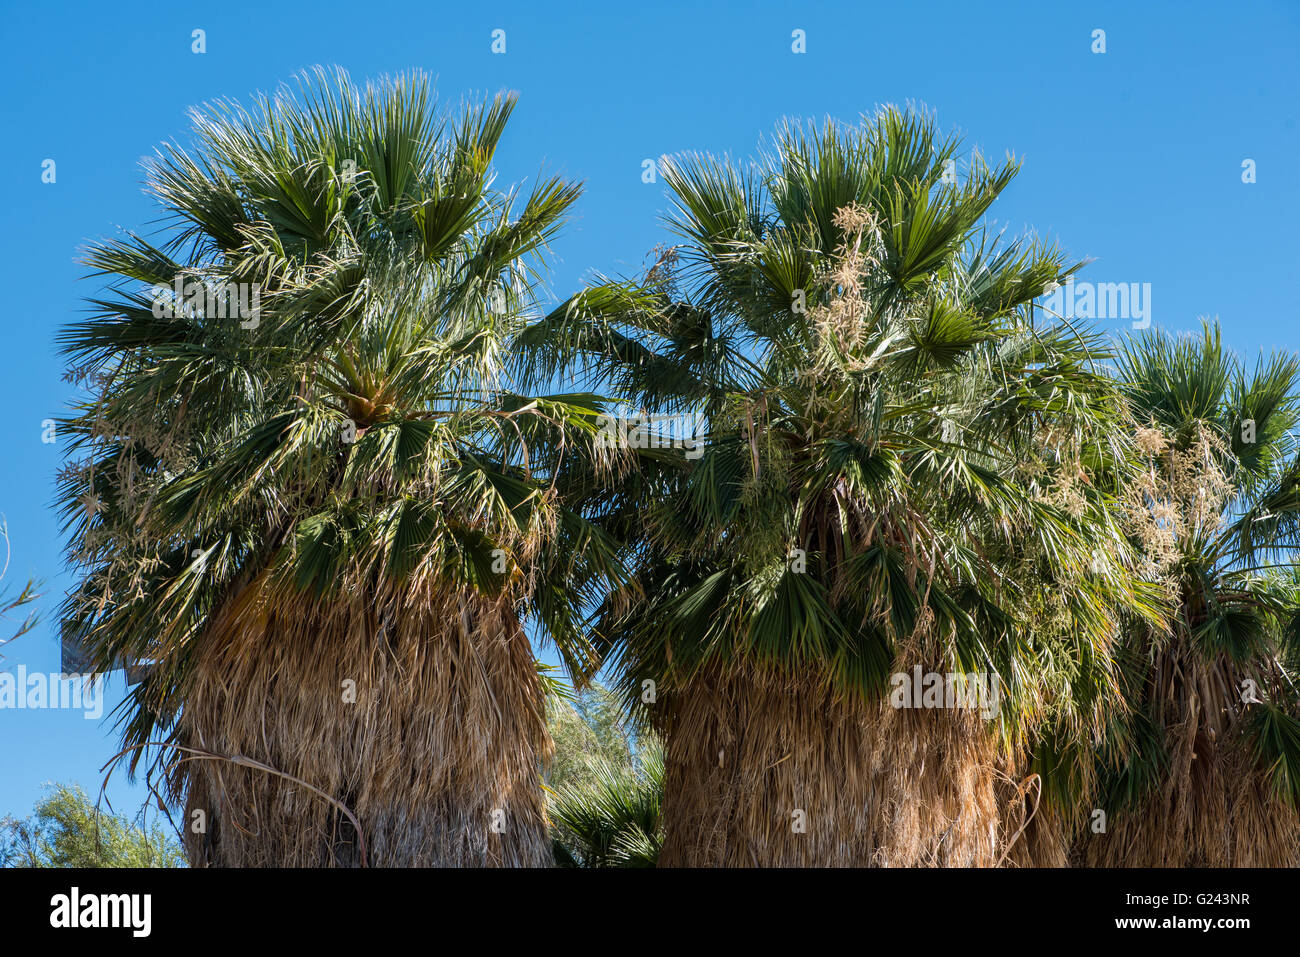 The tops of tall palm trees against a blue sky Stock Photo